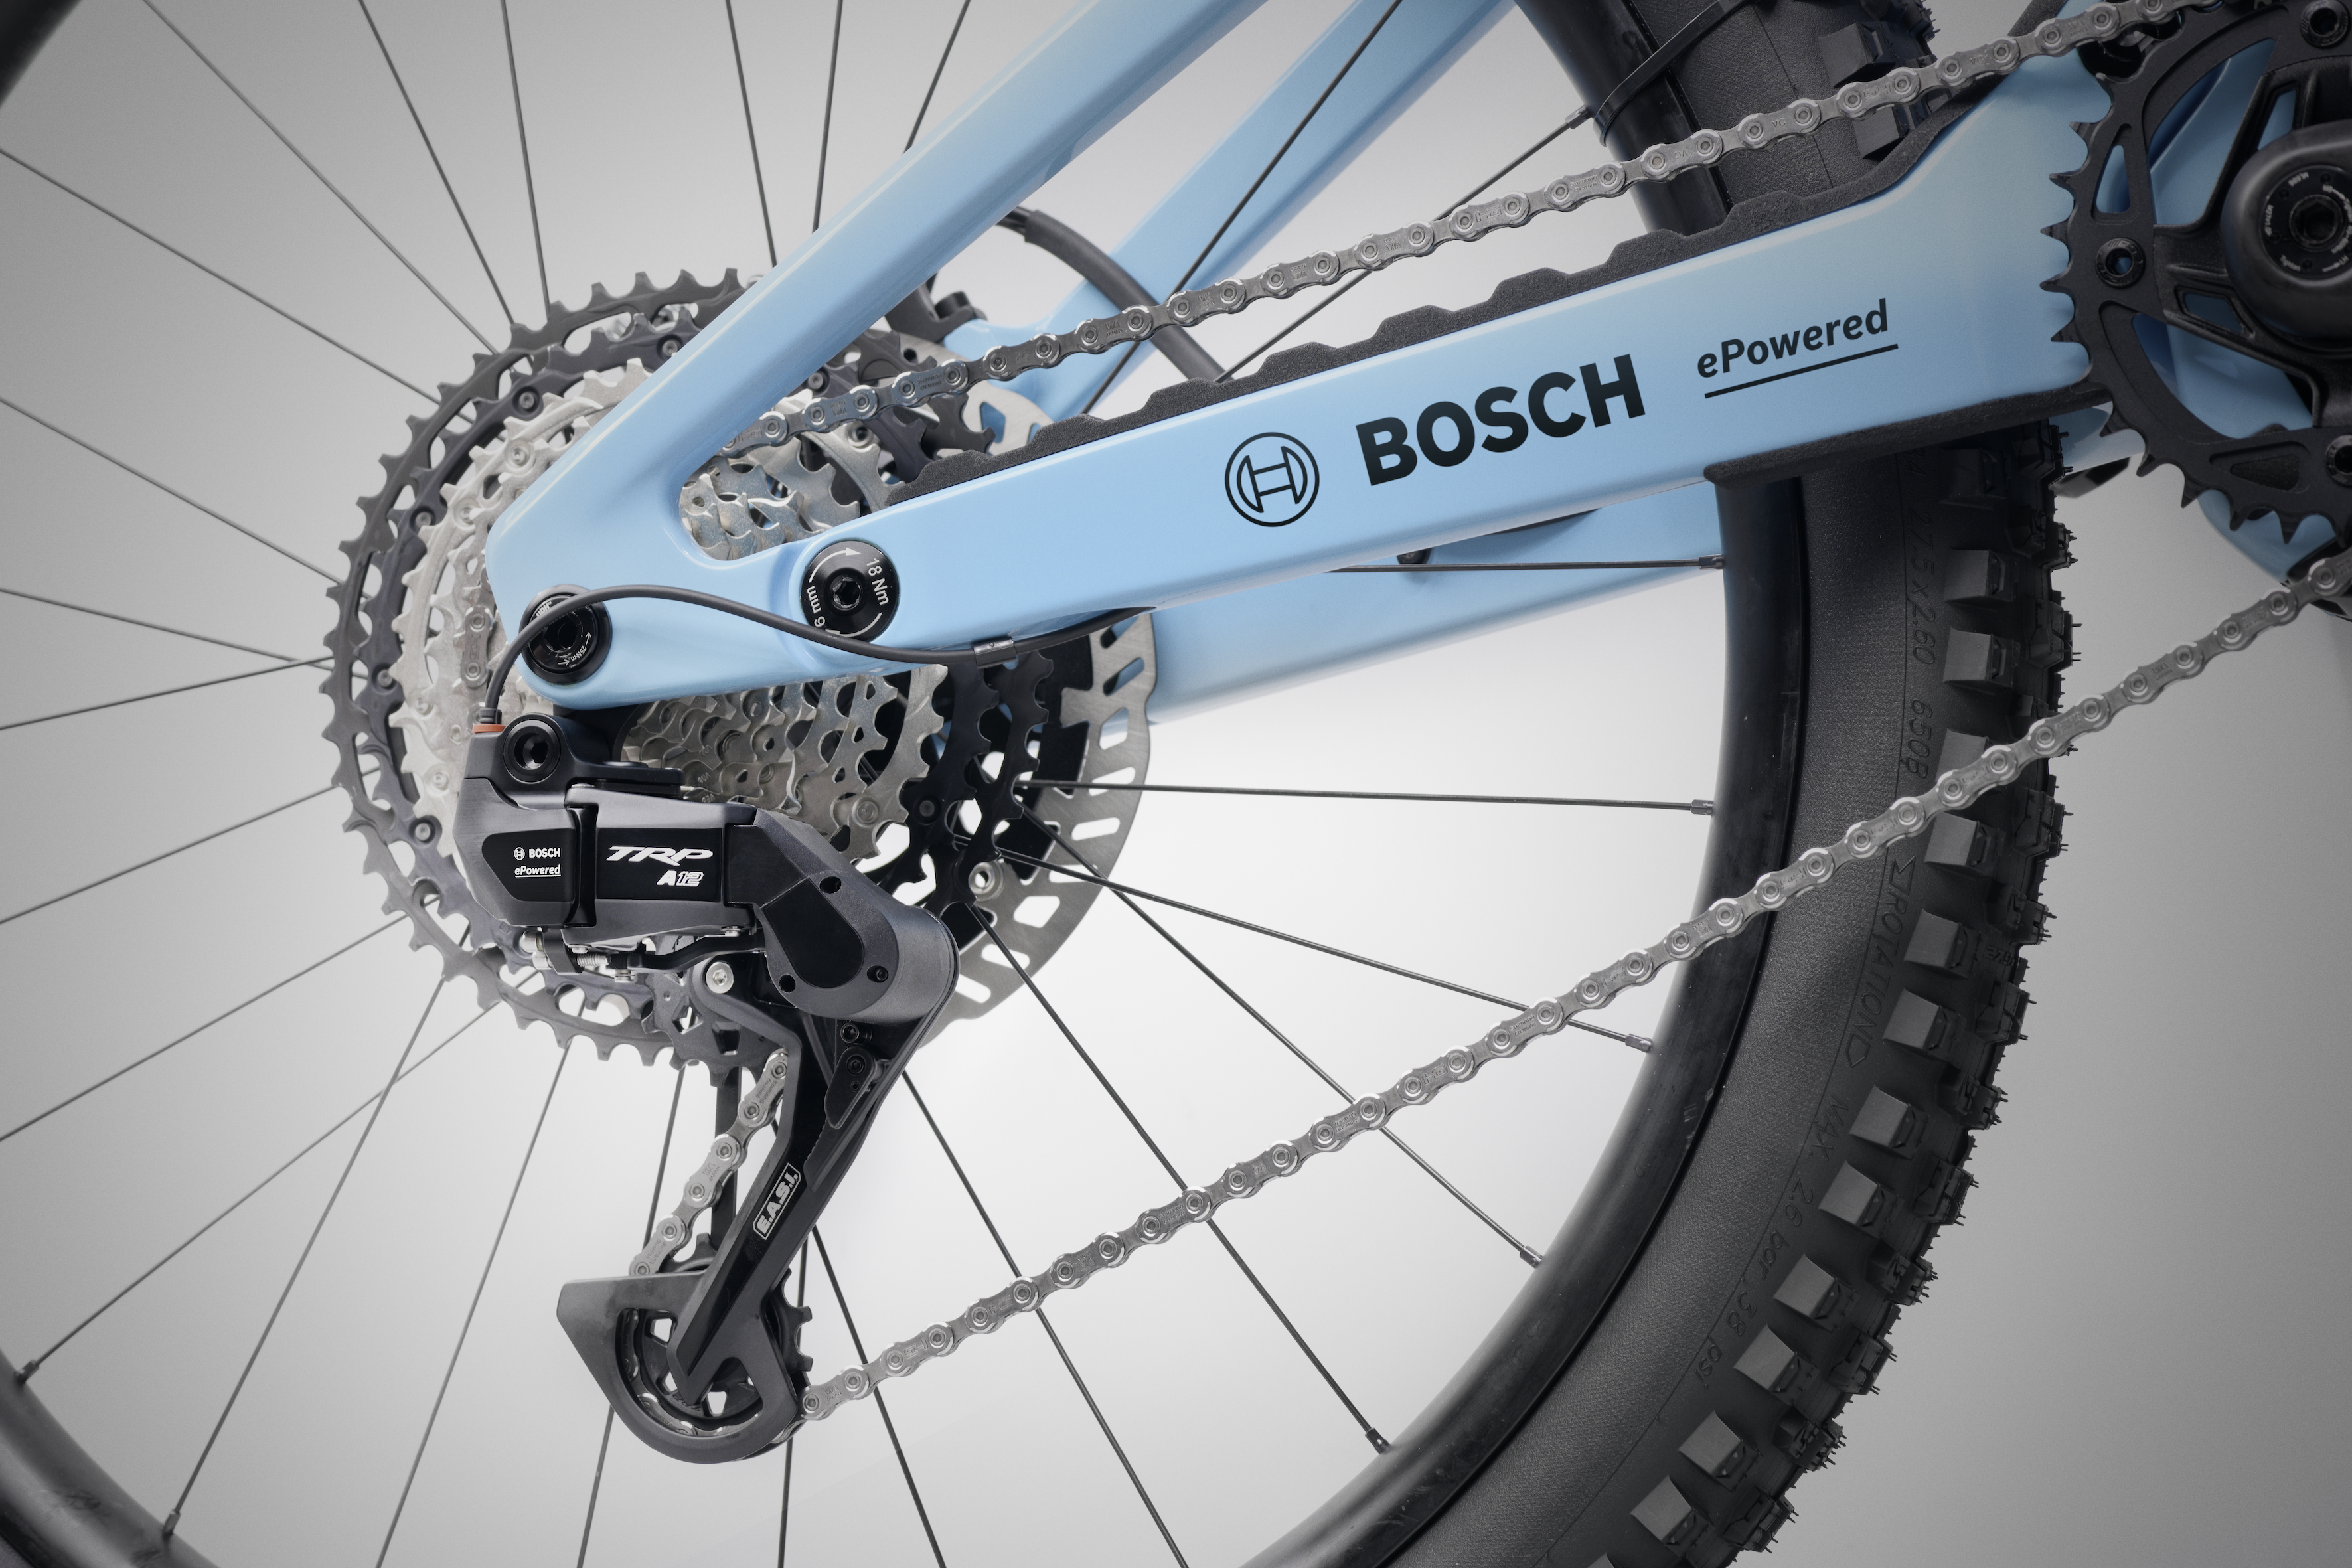 For sporty eBikers: automatic derailleur system now available in the smart system for the first time